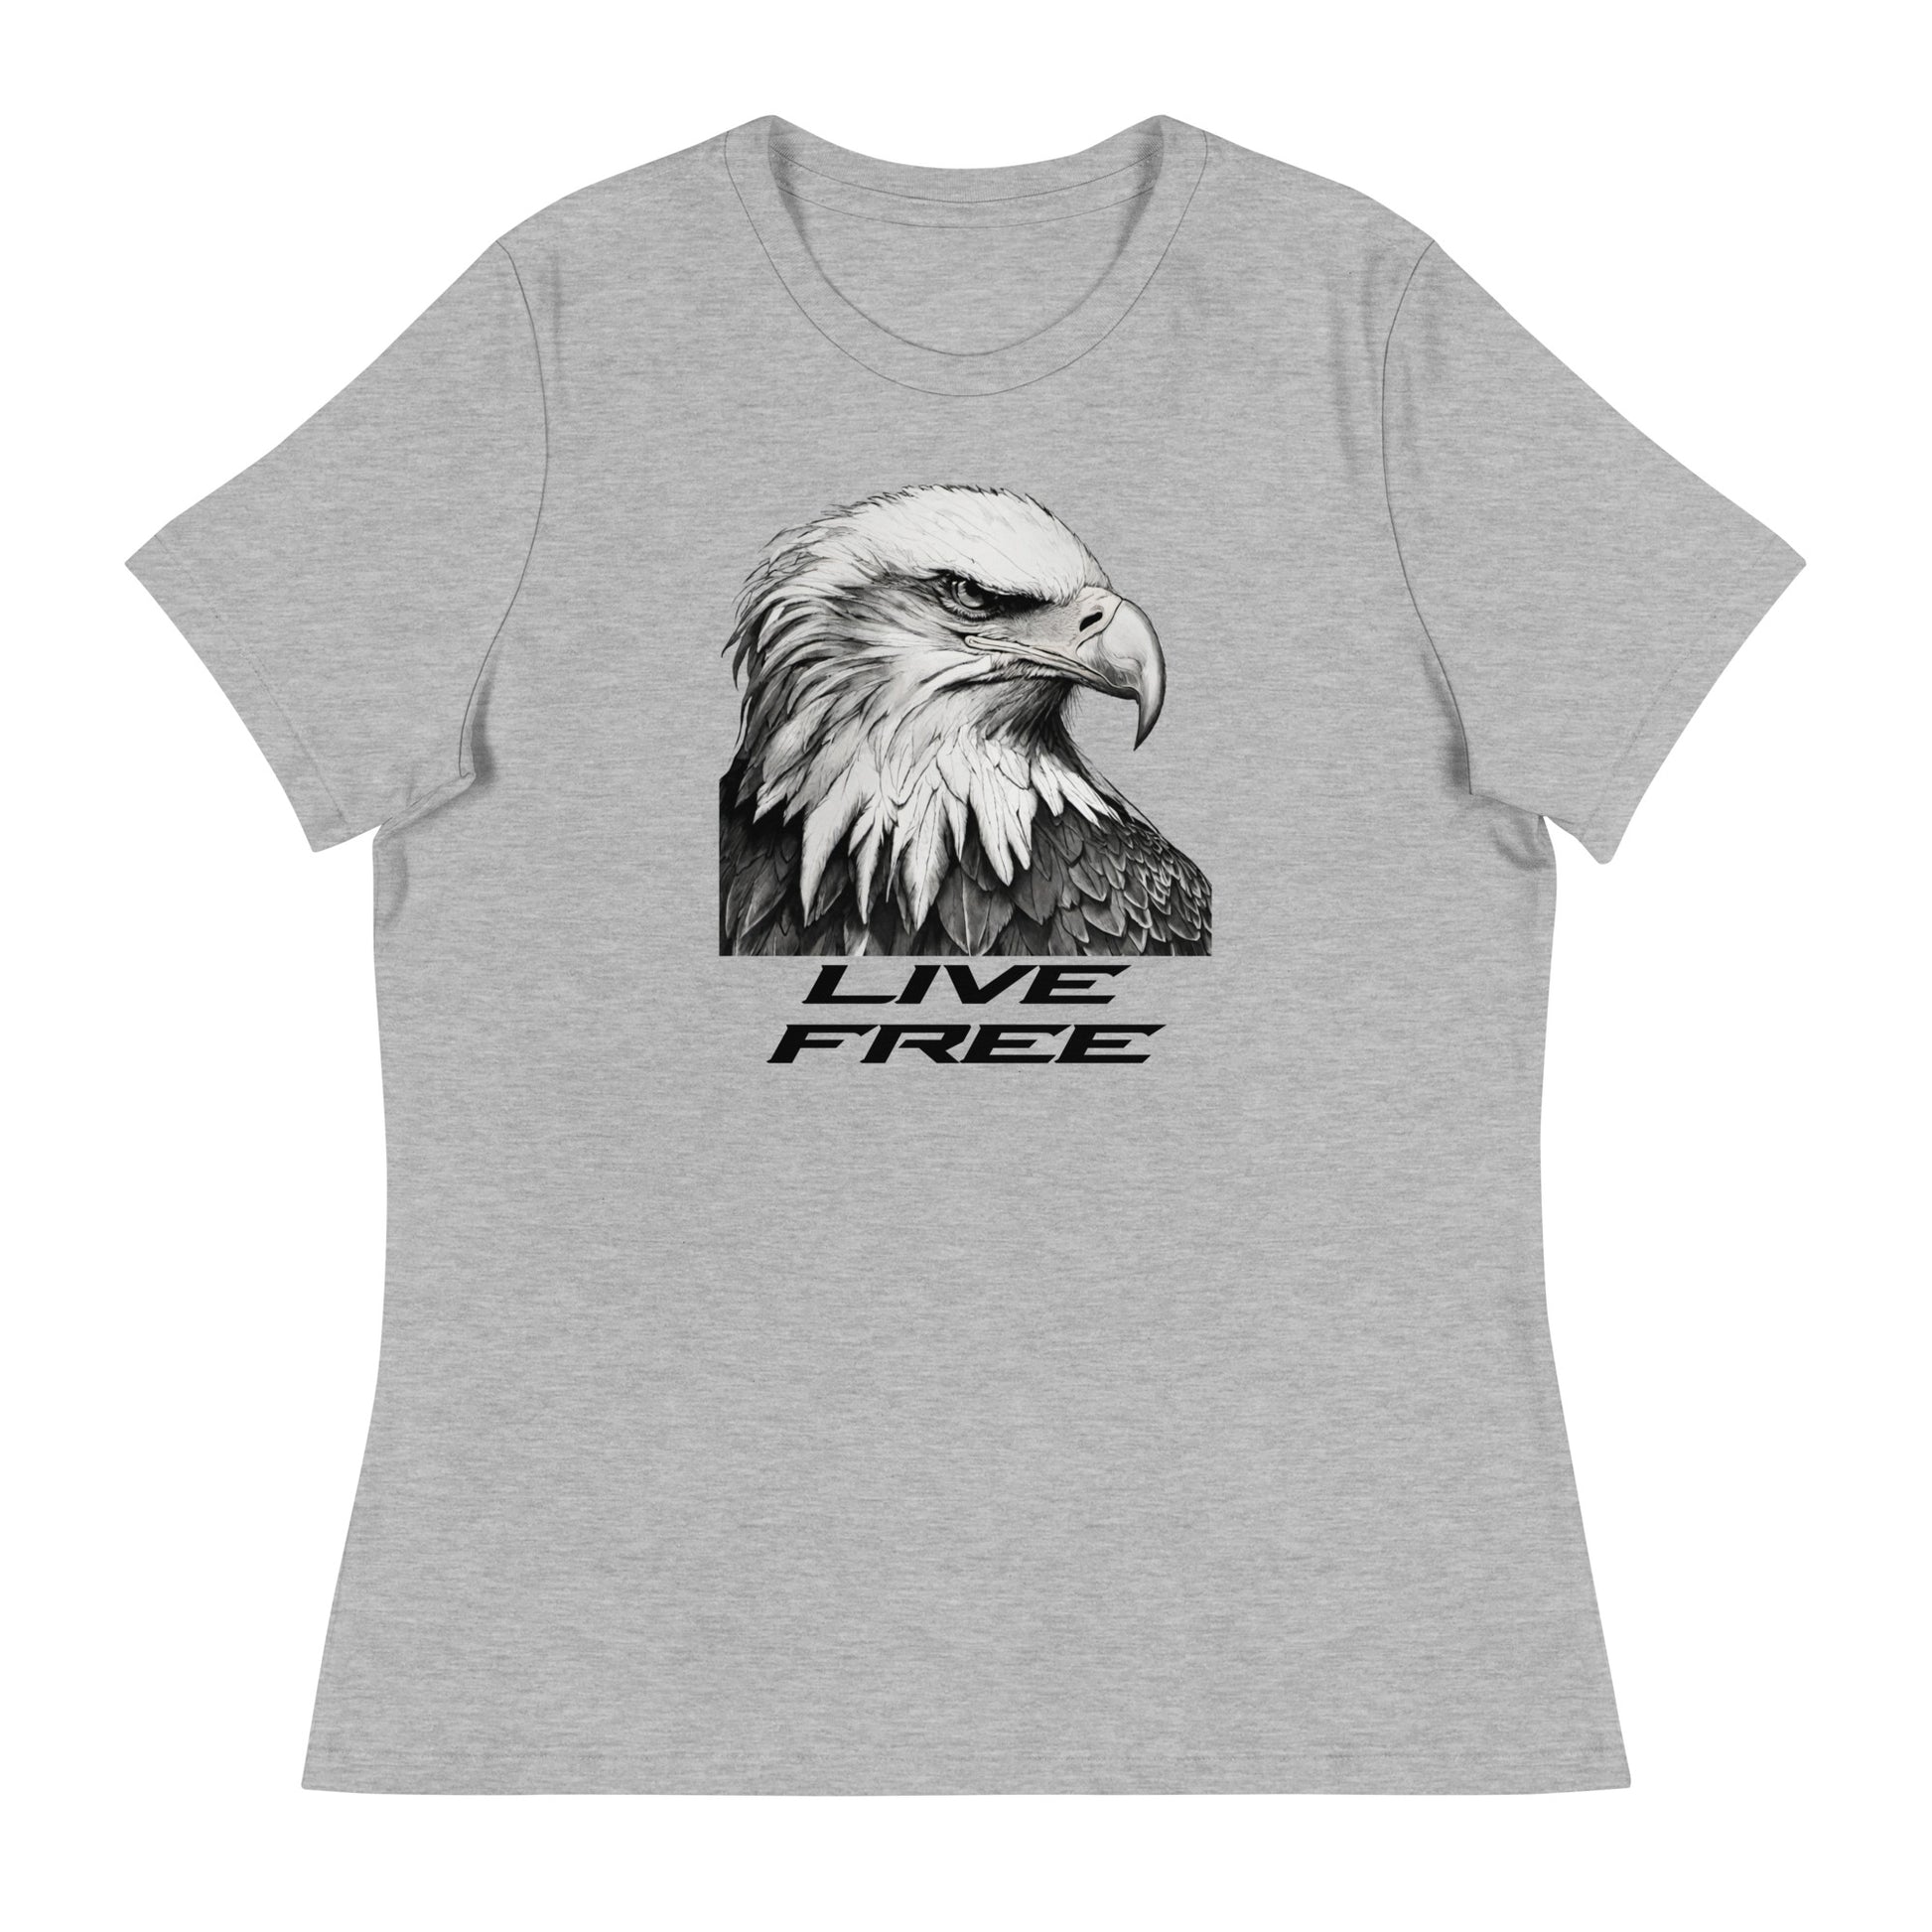 Live Free Women's T-Shirt Athletic Heather